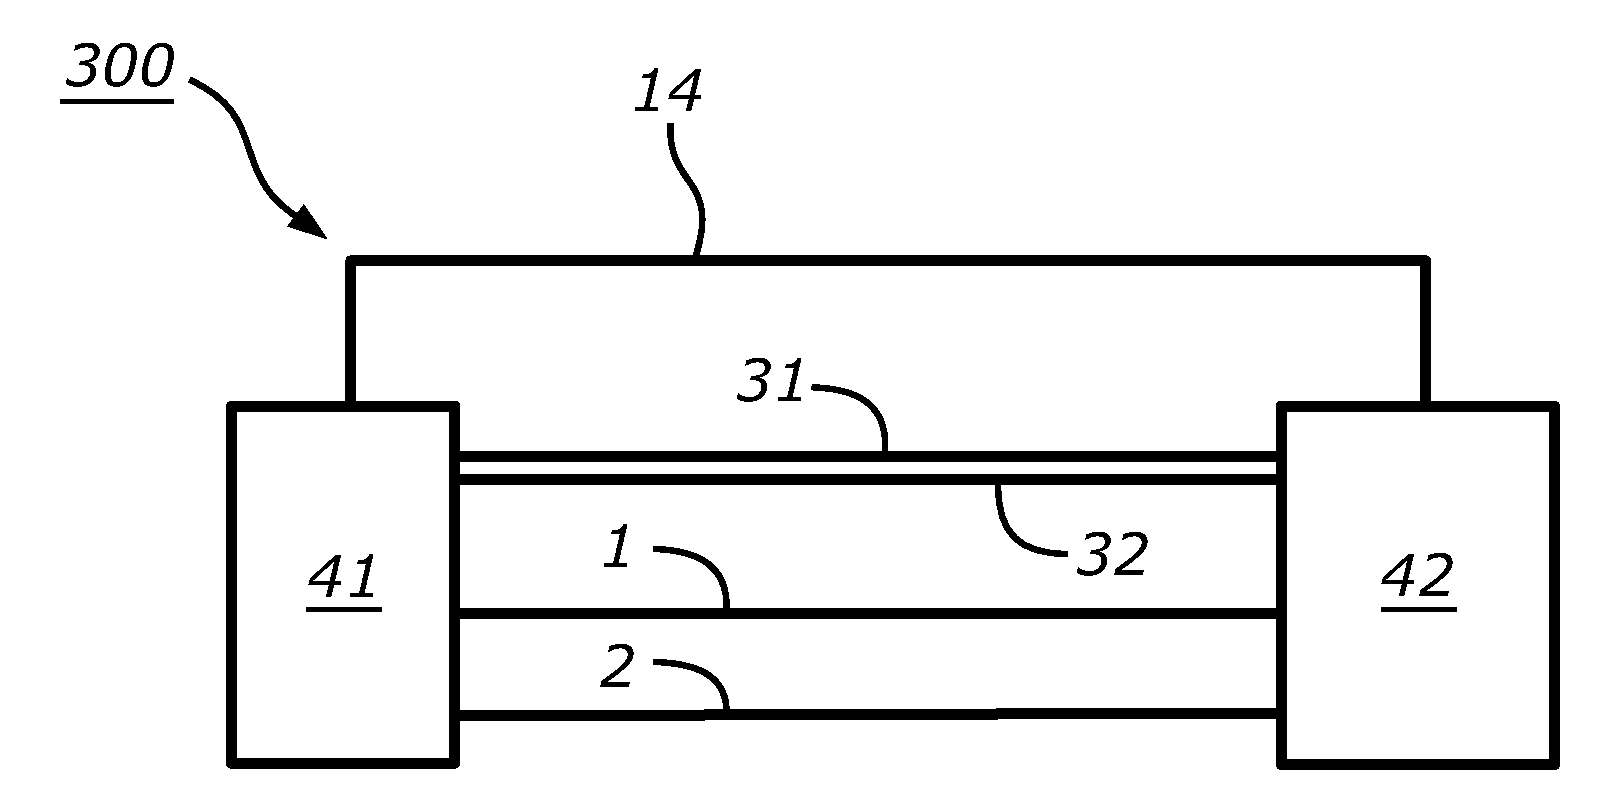 Signal measuring system, method for electrically conducting signals and a signal cable